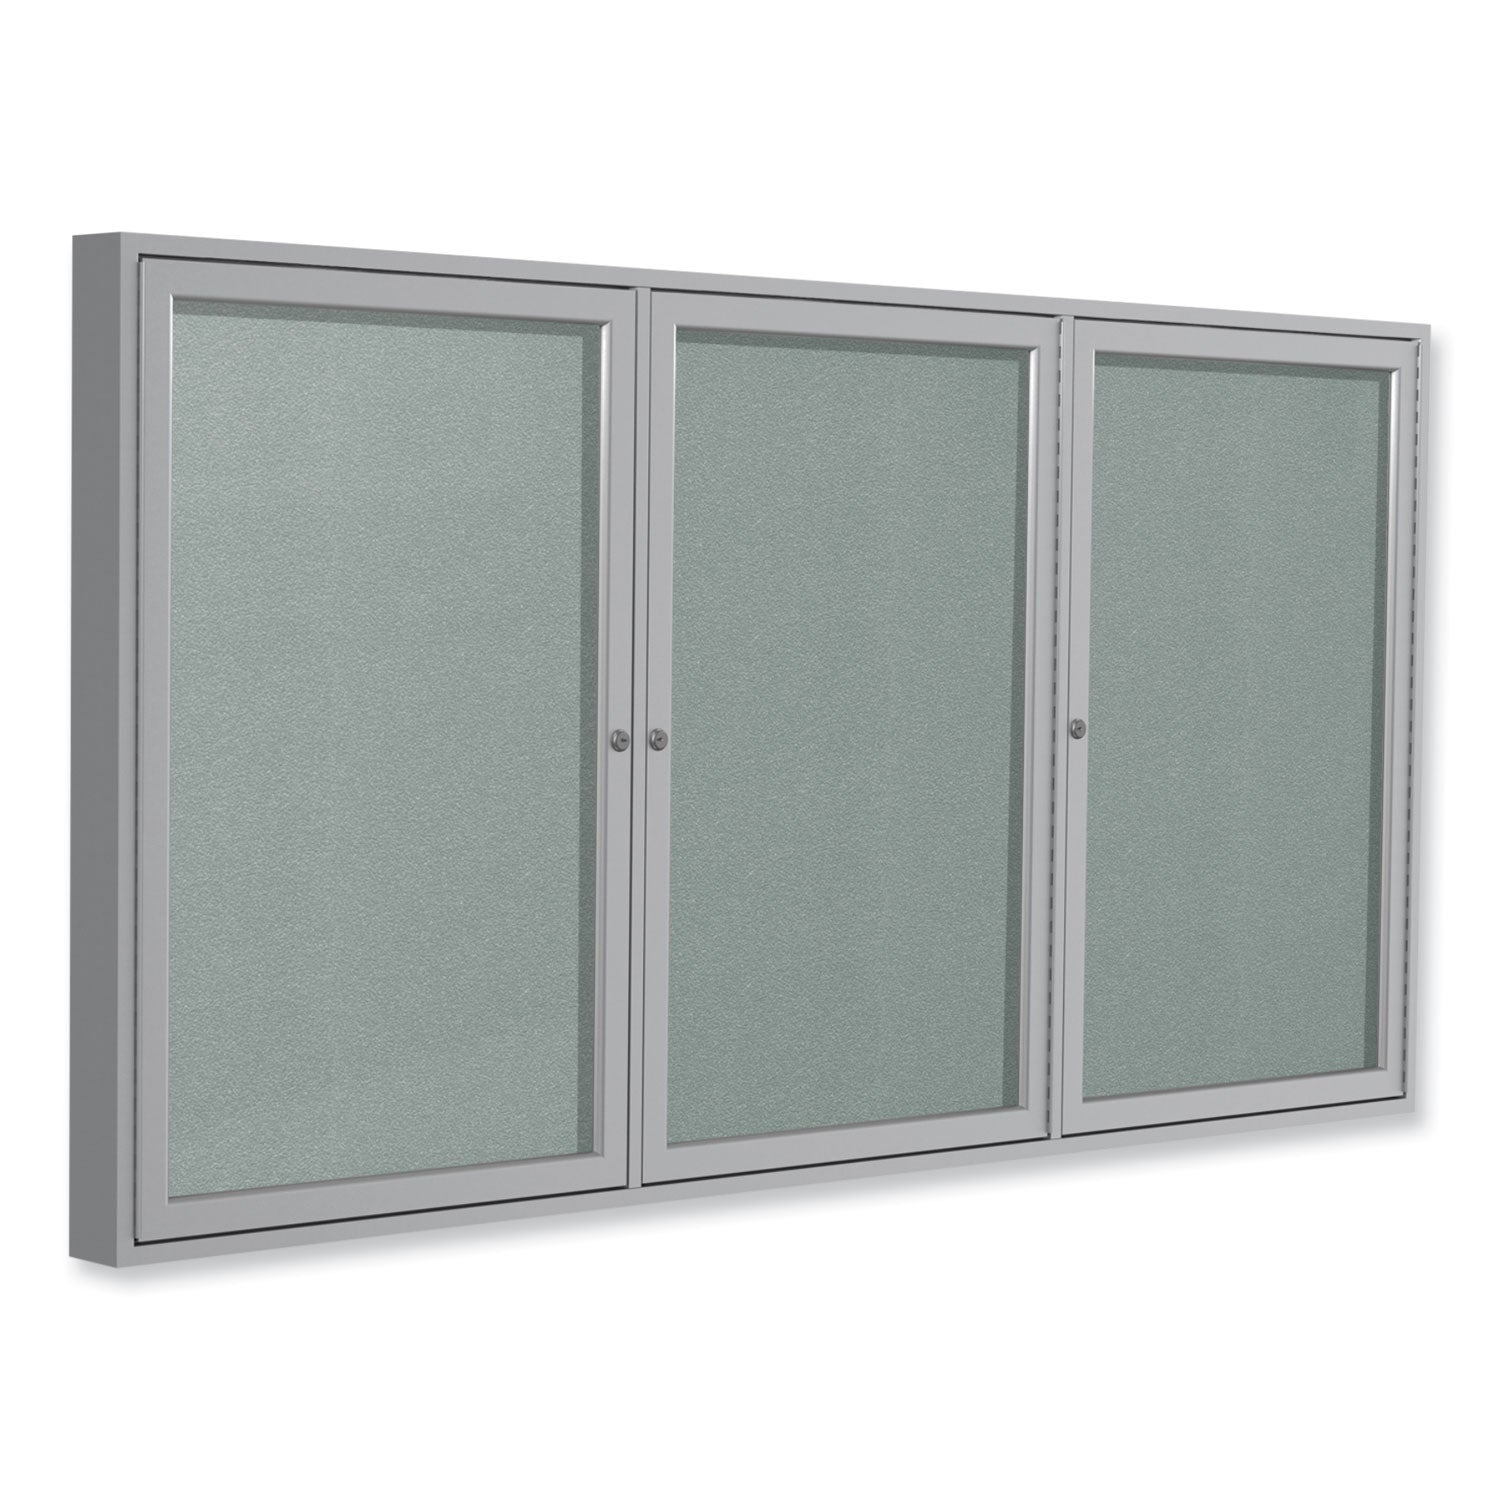 3-door-enclosed-vinyl-bulletin-board-with-satin-aluminum-frame-96-x-48-silver-surface-ships-in-7-10-business-days_ghepa34896vx193 - 1